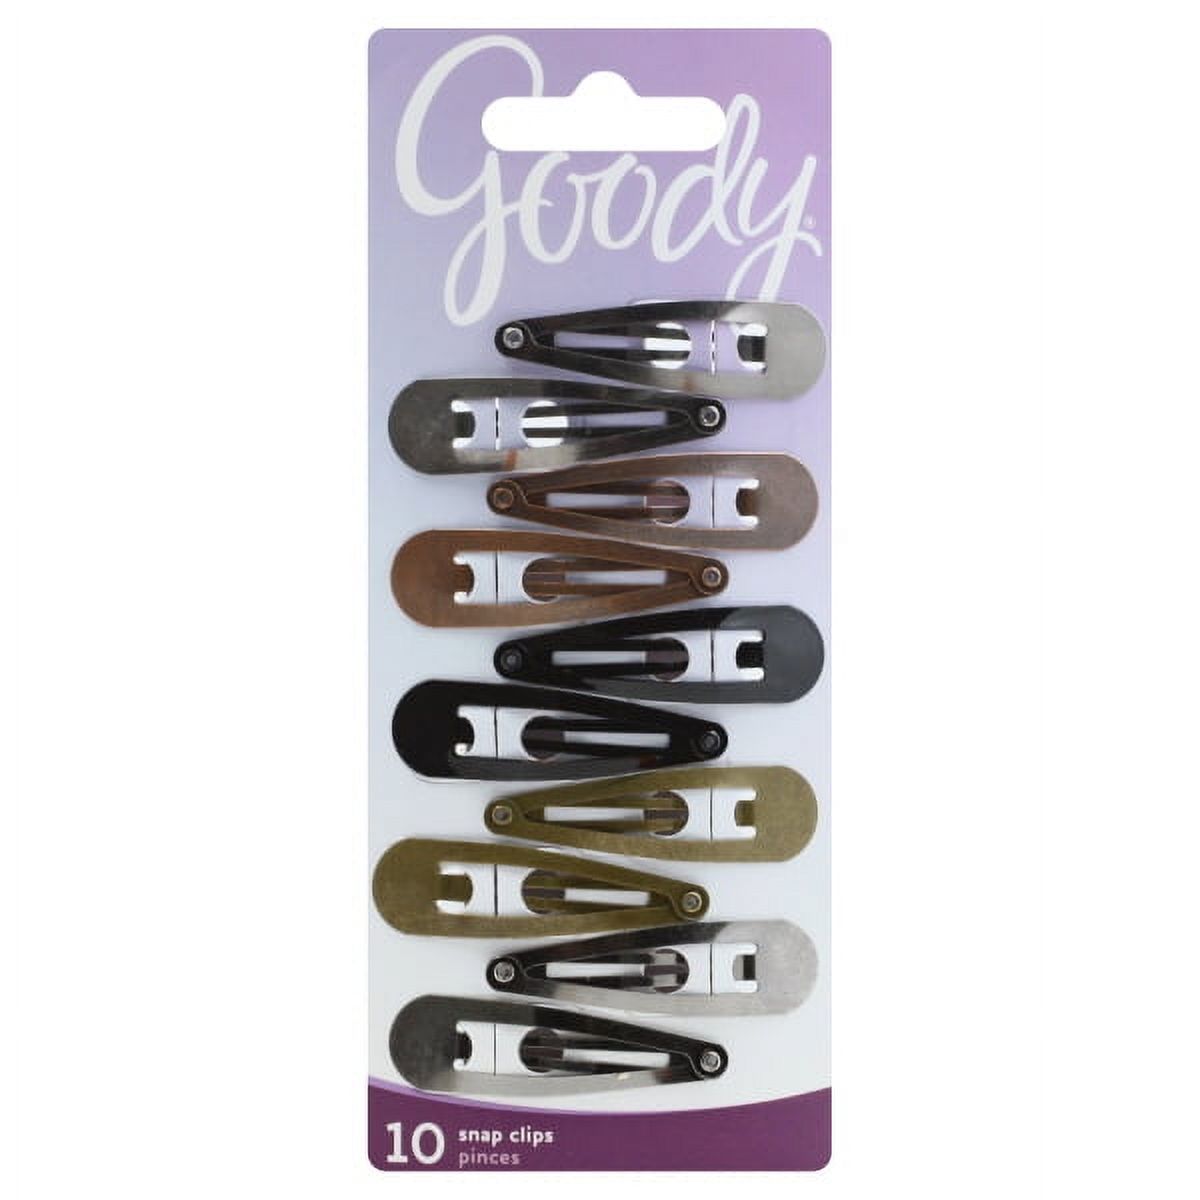 Goody Ally Snap Clips 10 count - image 1 of 6